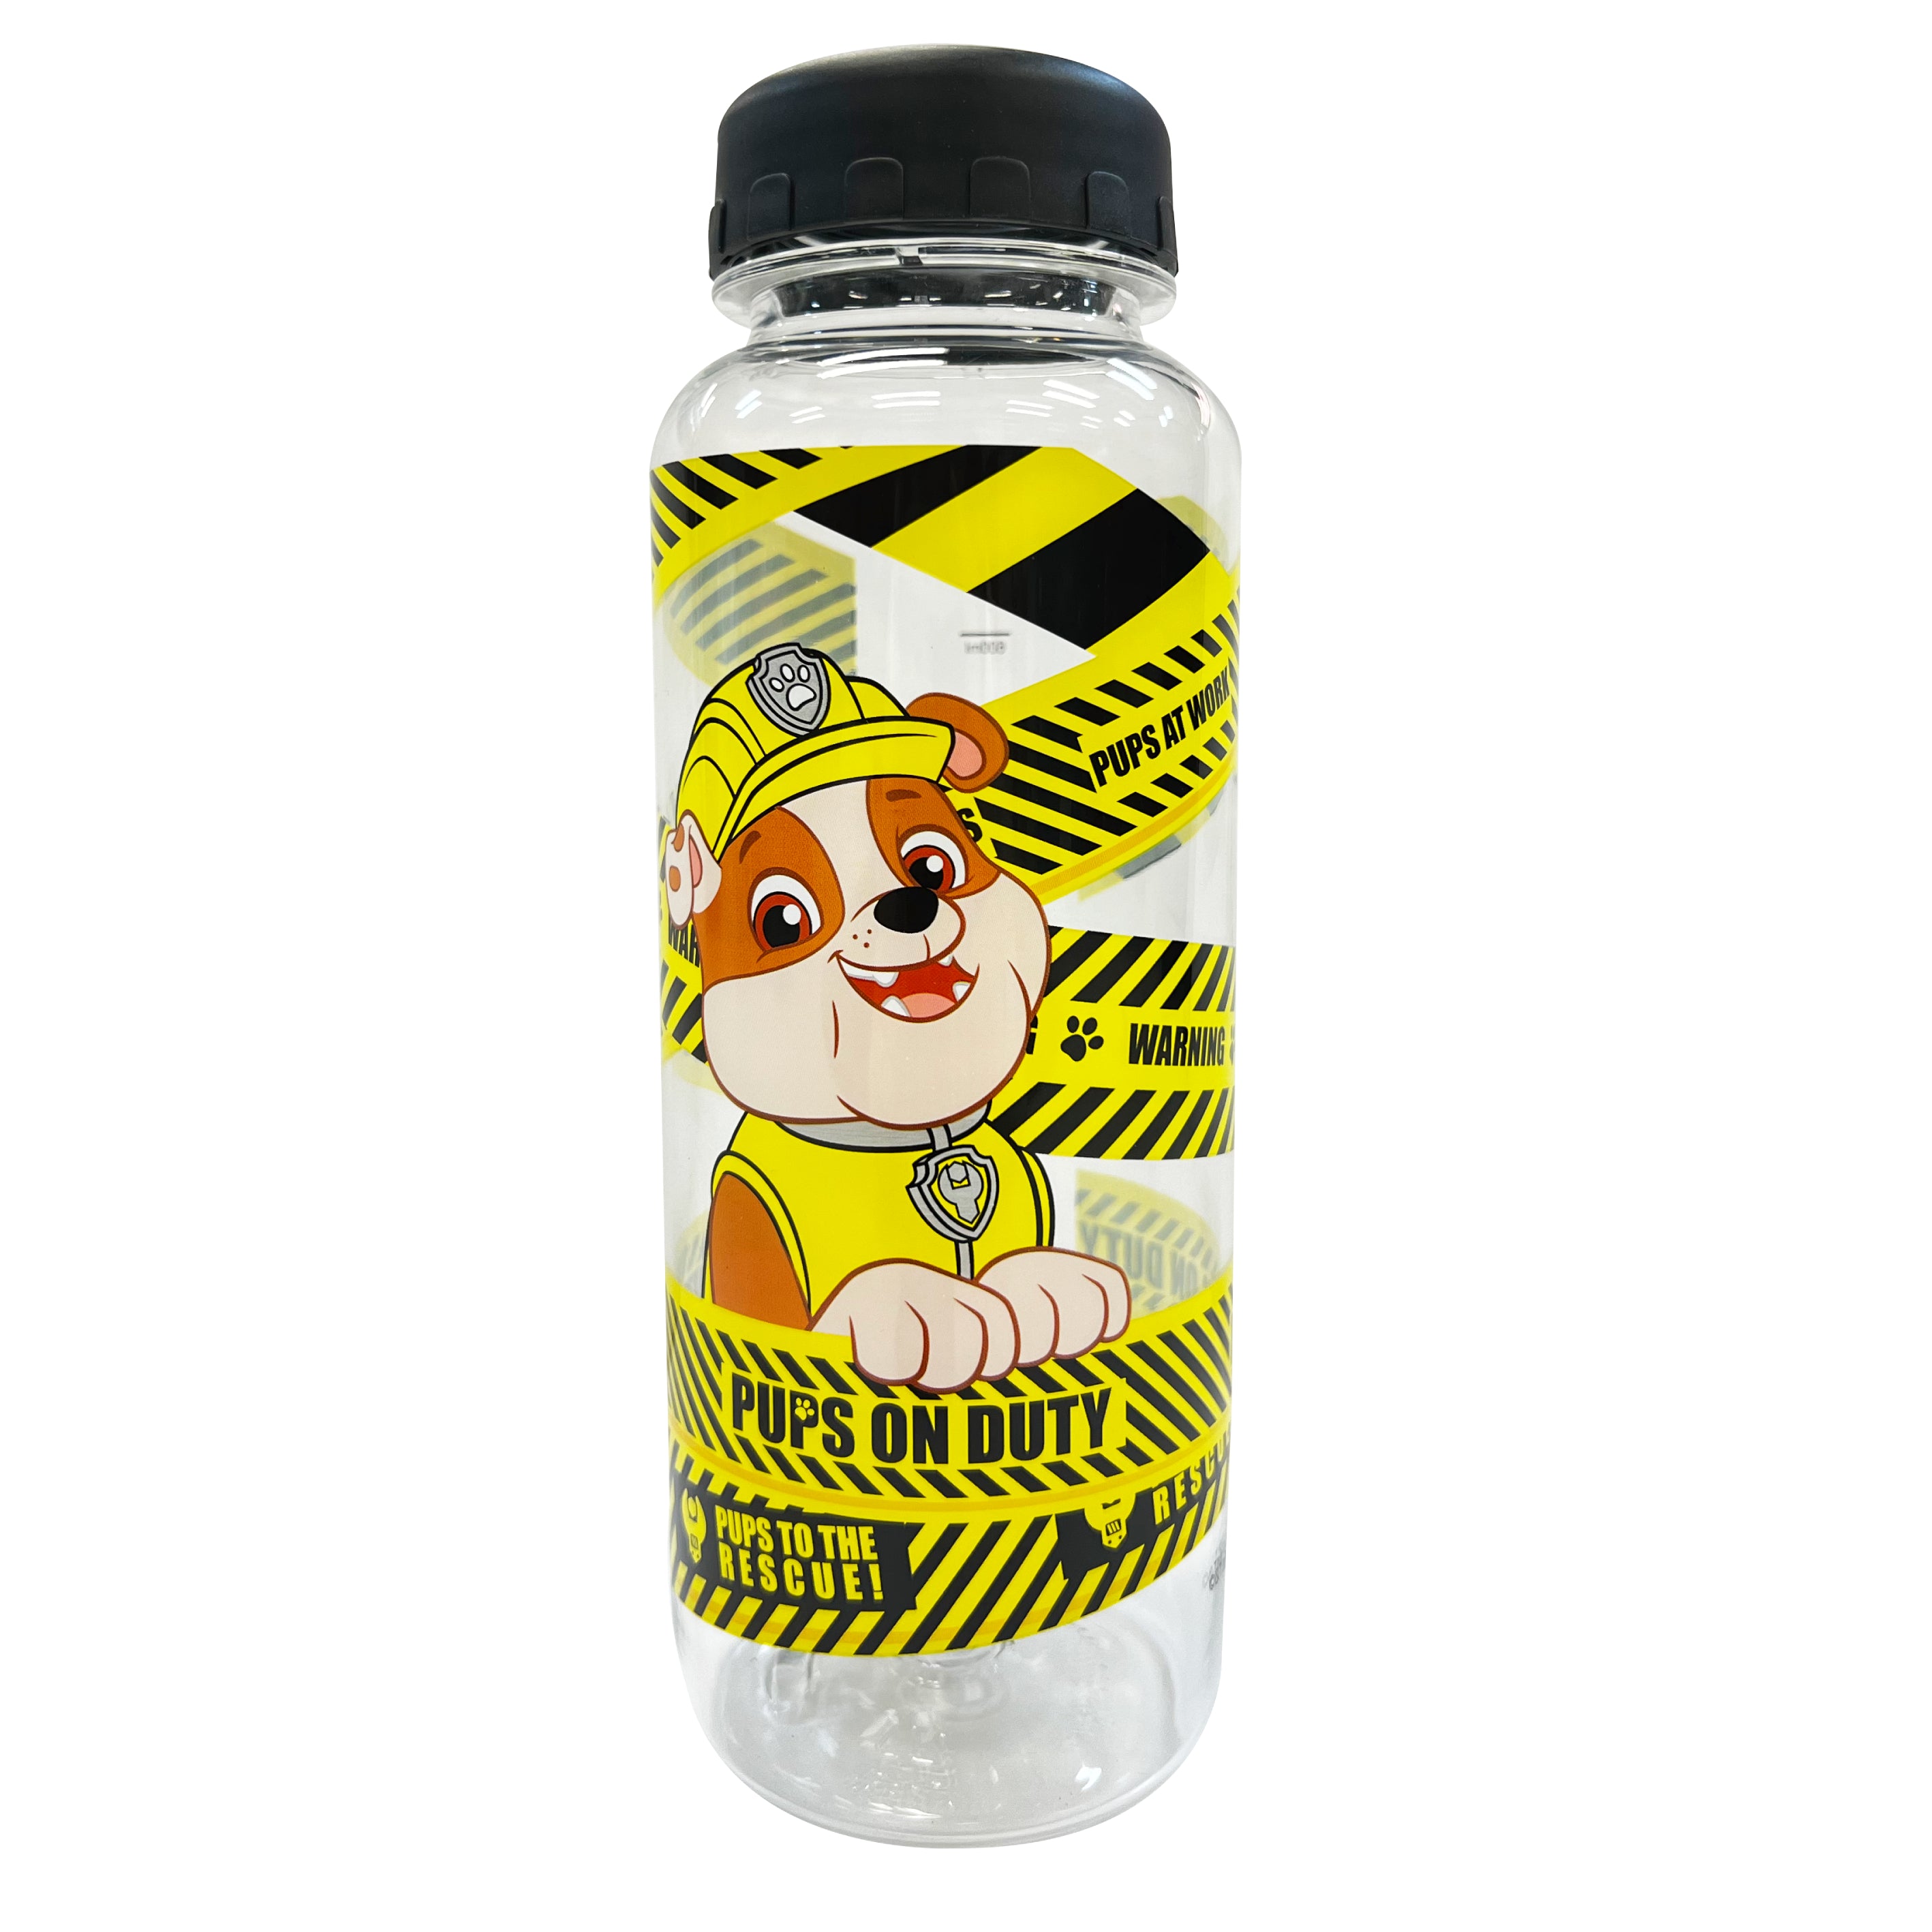 PAW PATROL Water Bottle with Lid 750ML - _MS, ECTL-2NDPCS50, ECTL-AUG23, FABER-CASTELL, PAW PATROL